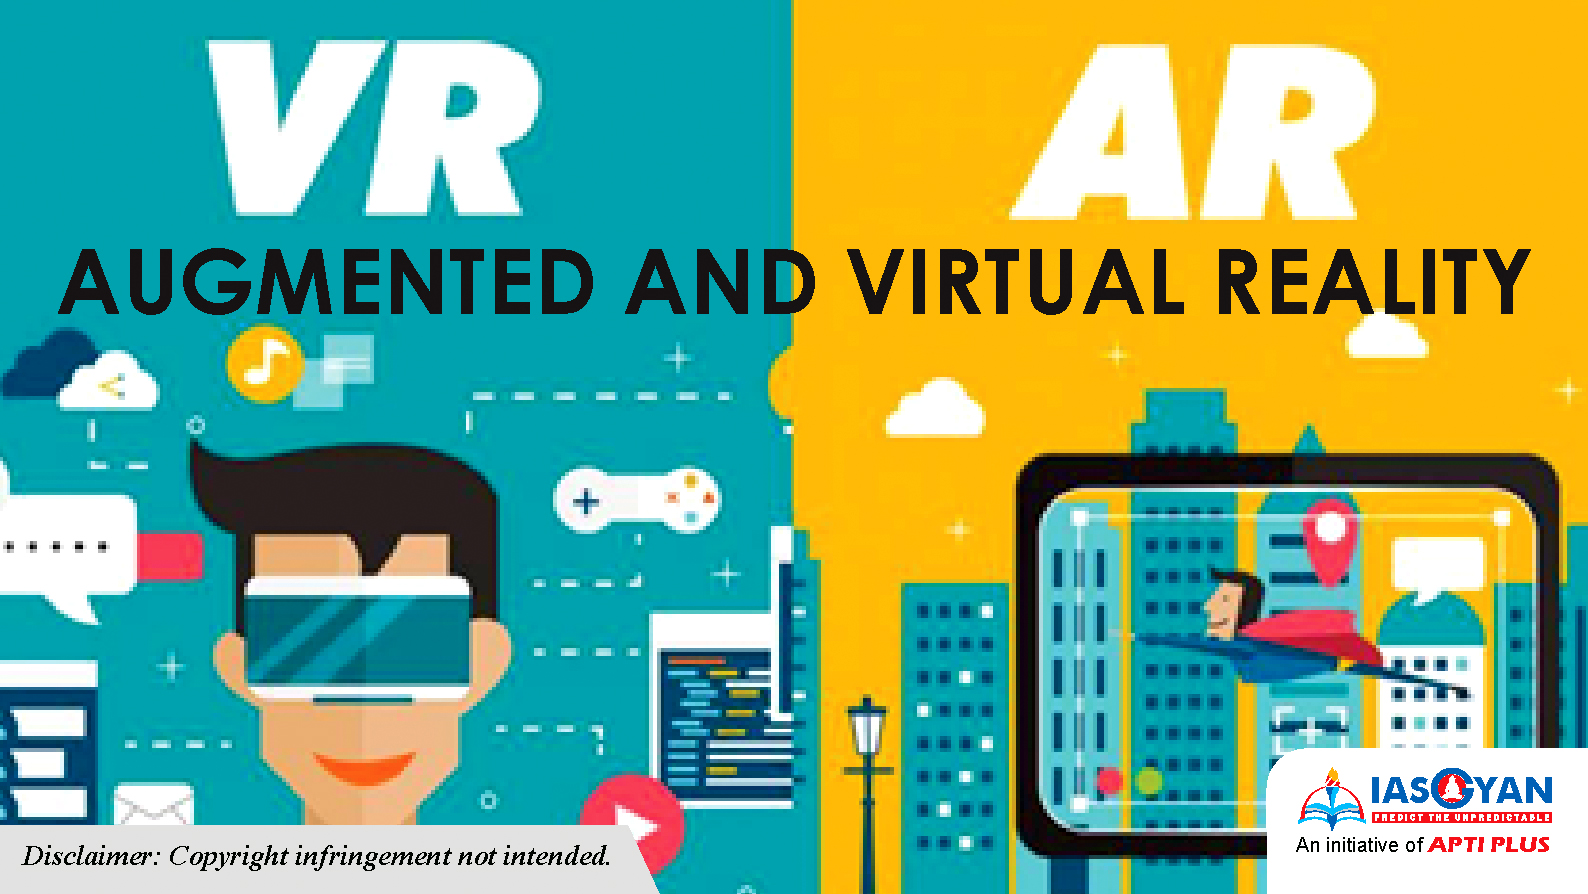 AUGMENTED AND VIRTUAL REALITY